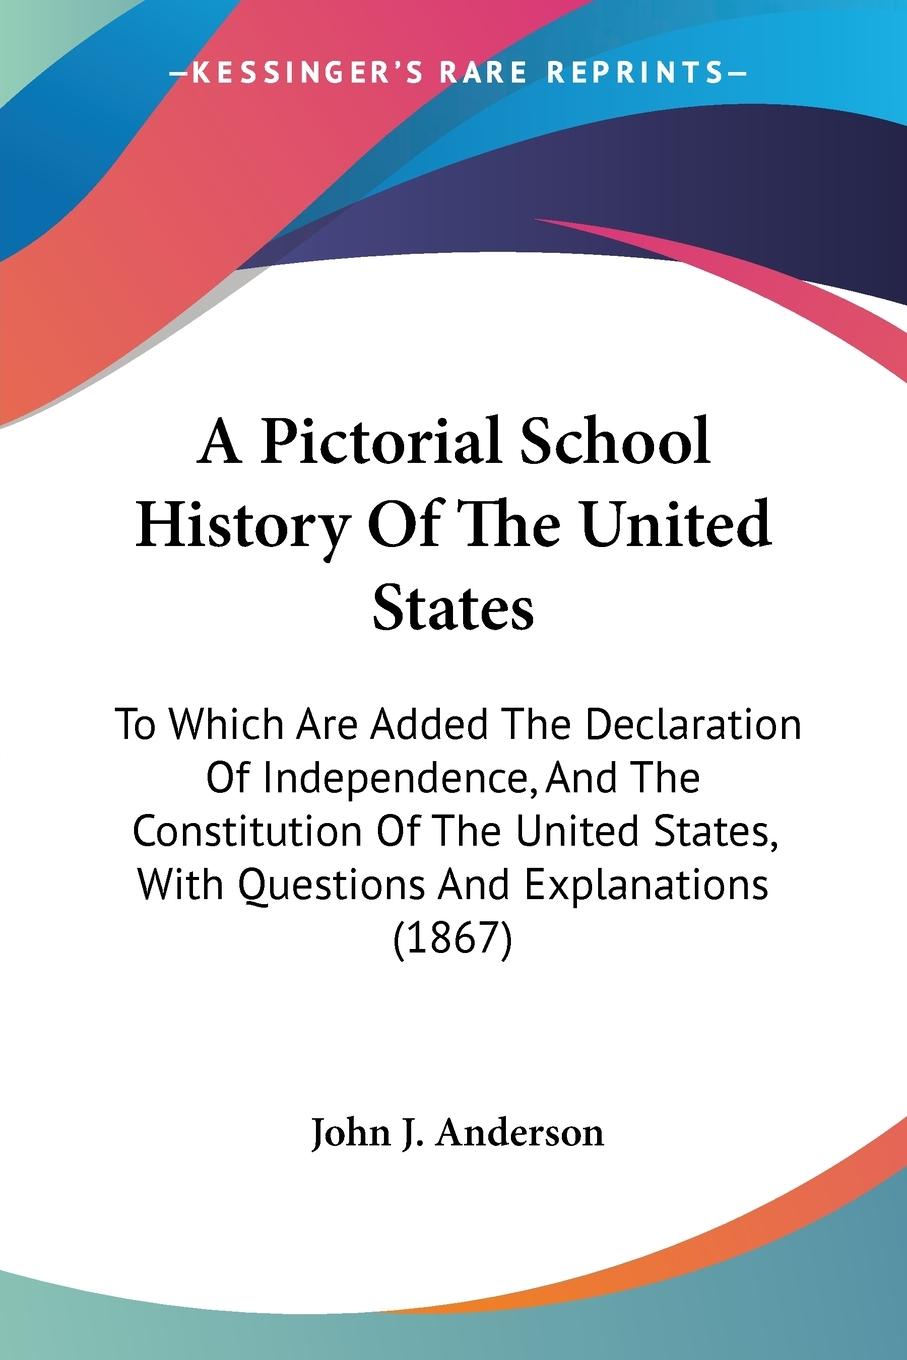 A Pictorial School History Of The United States - Anderson, John J.